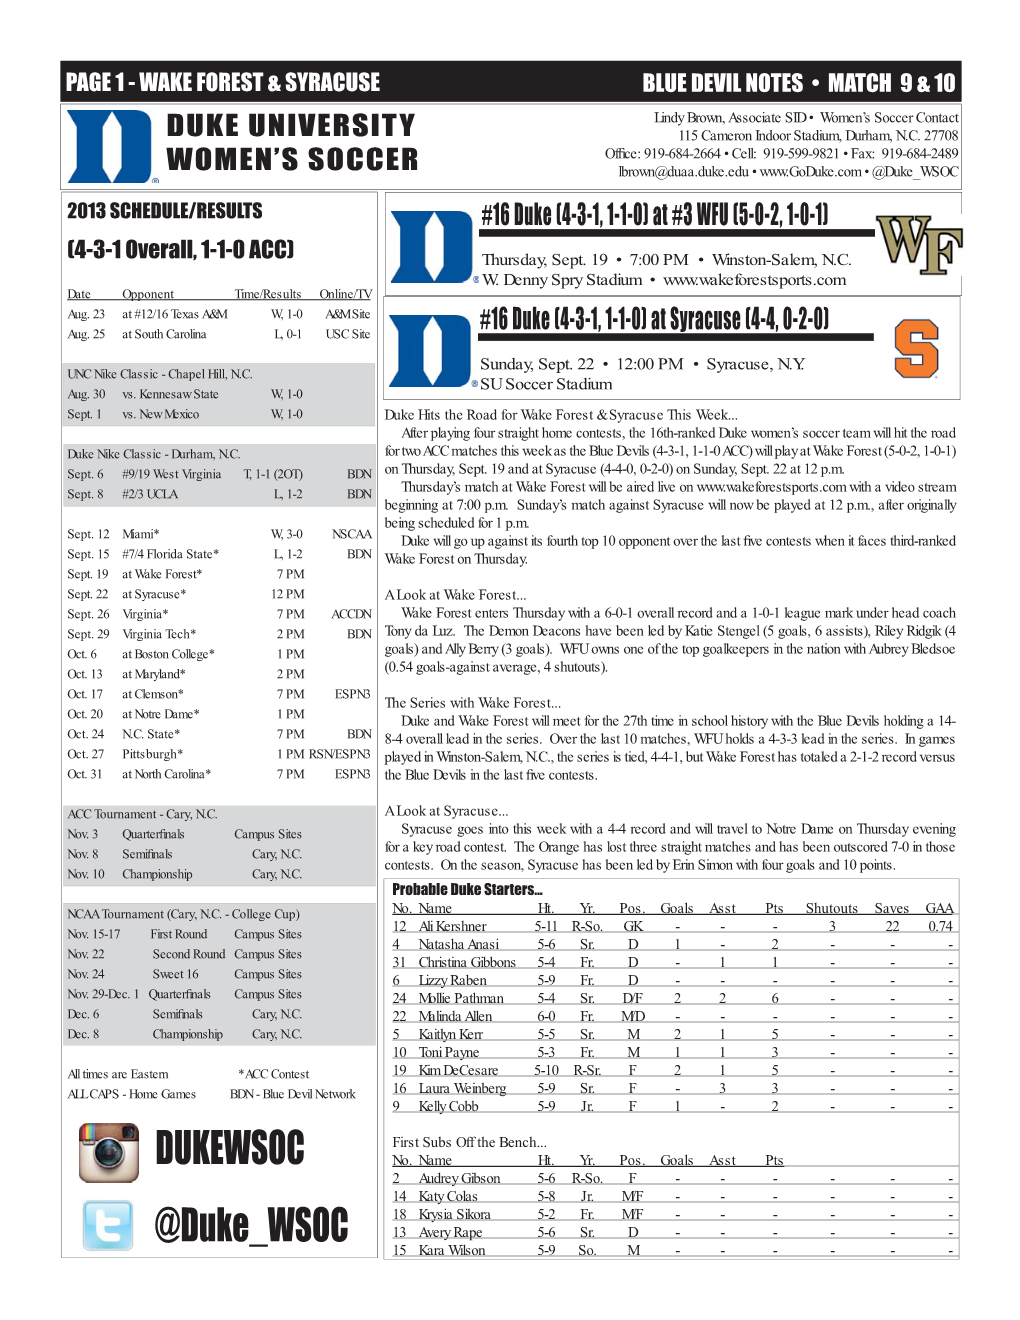 WS-Game Notes